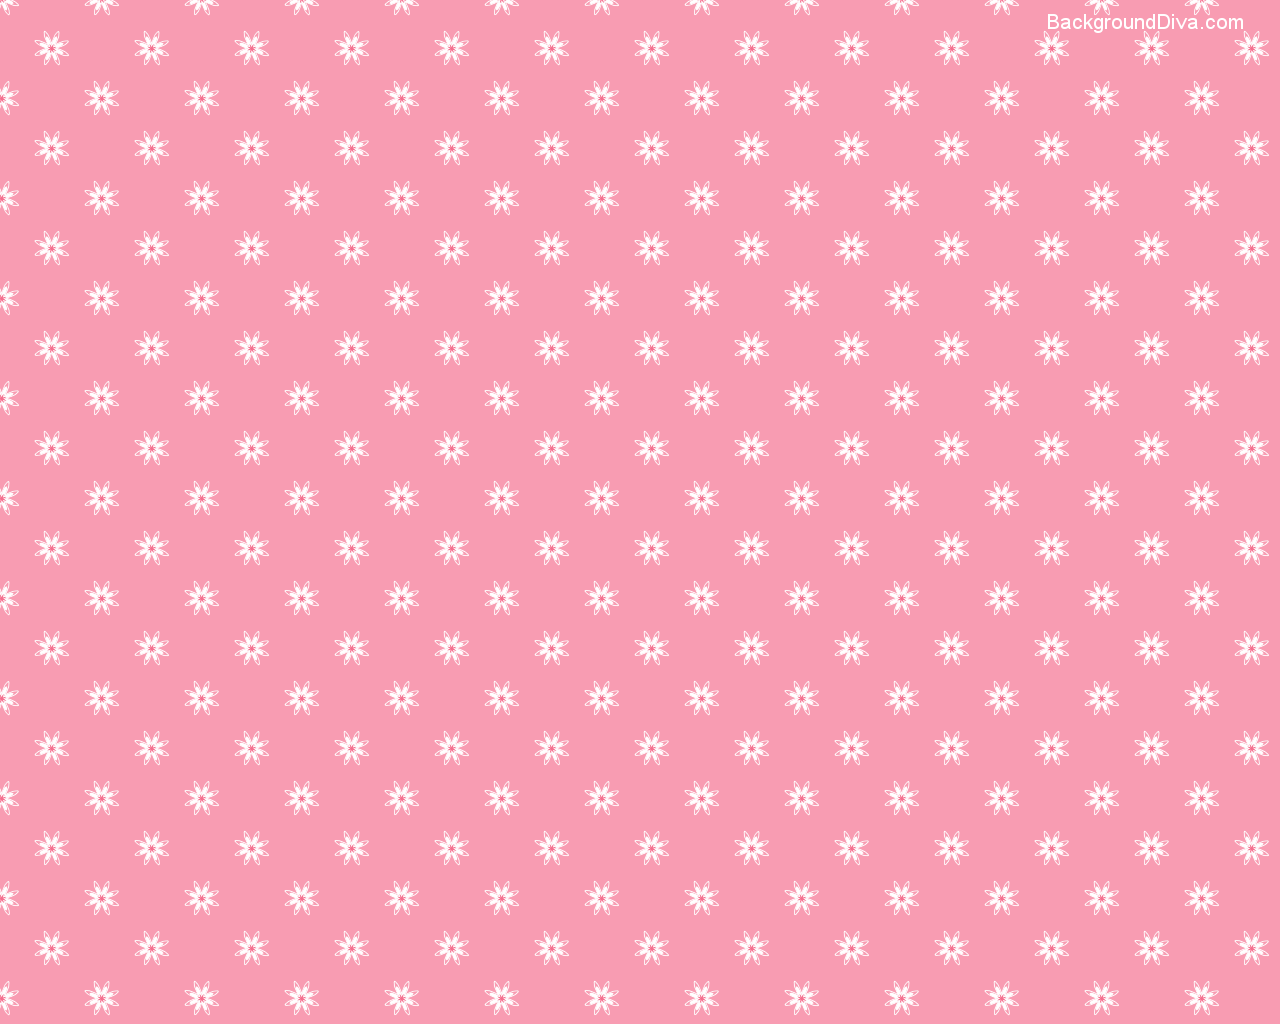 Pink Backgrounds Wallpapers - Wallpaper Cave